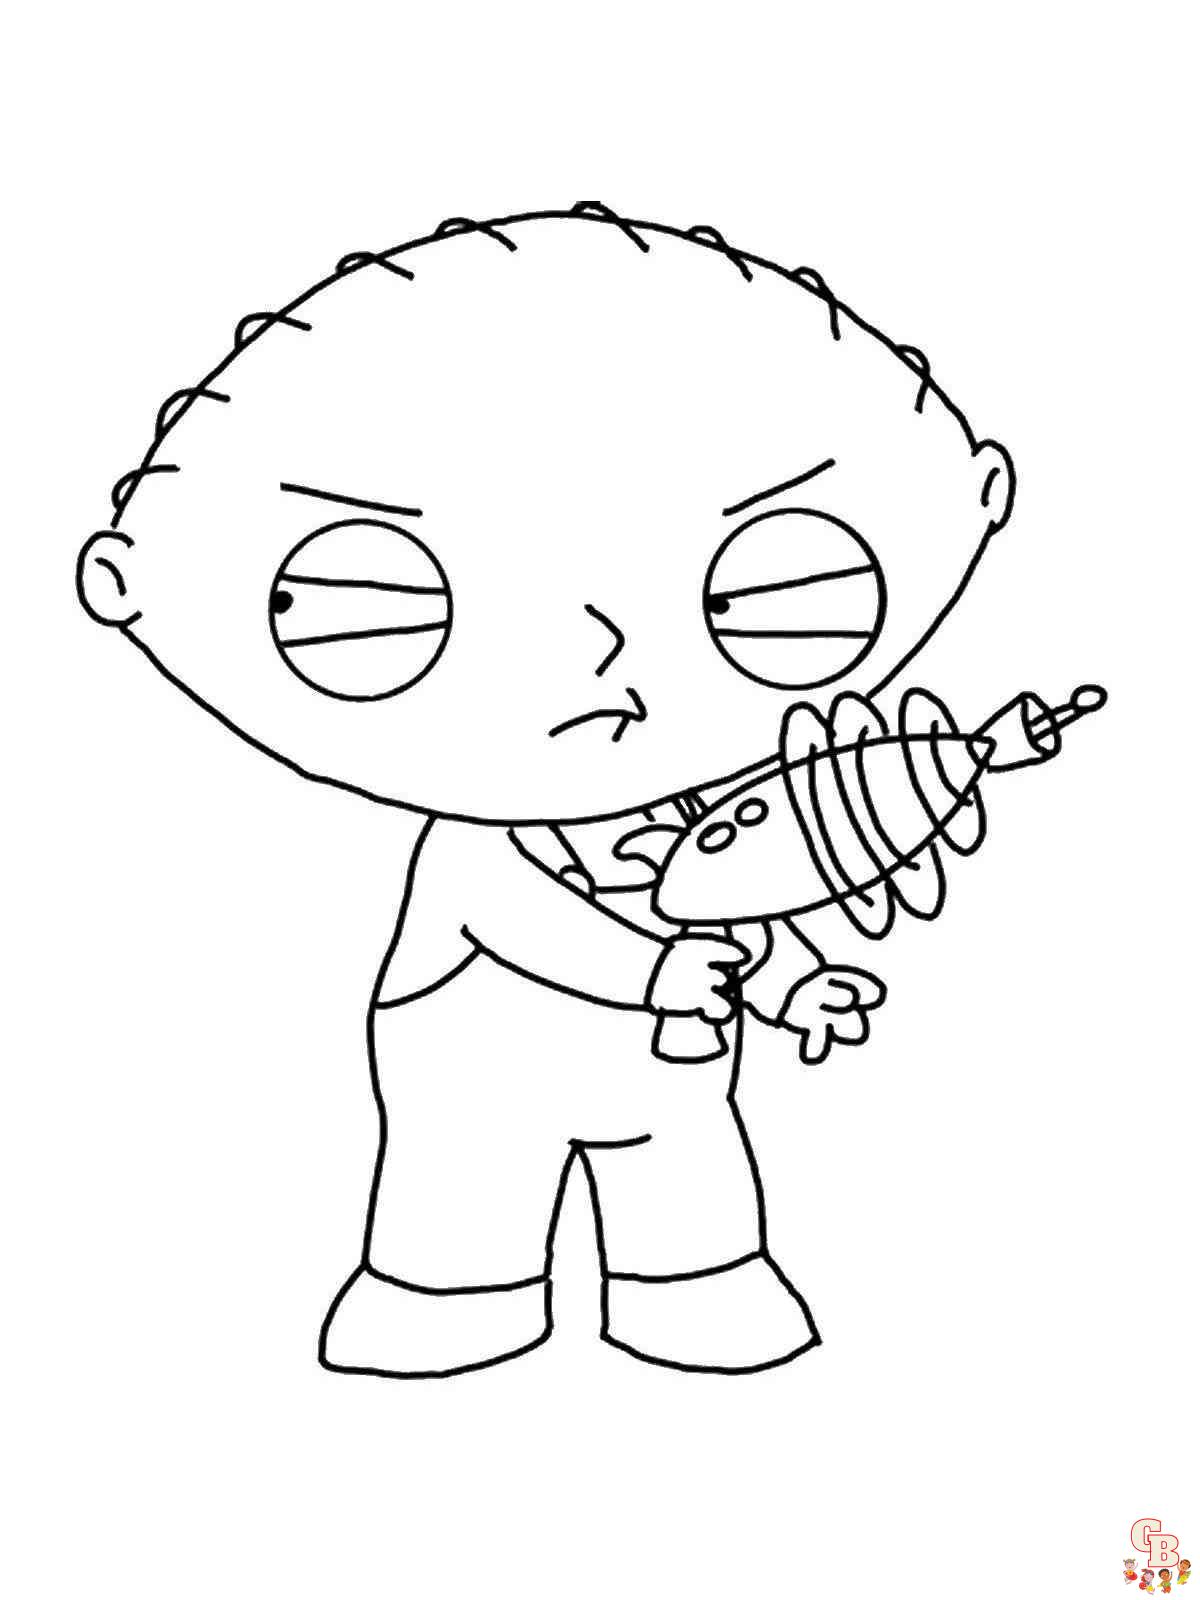 Stewie Griffin Coloring Pages 6